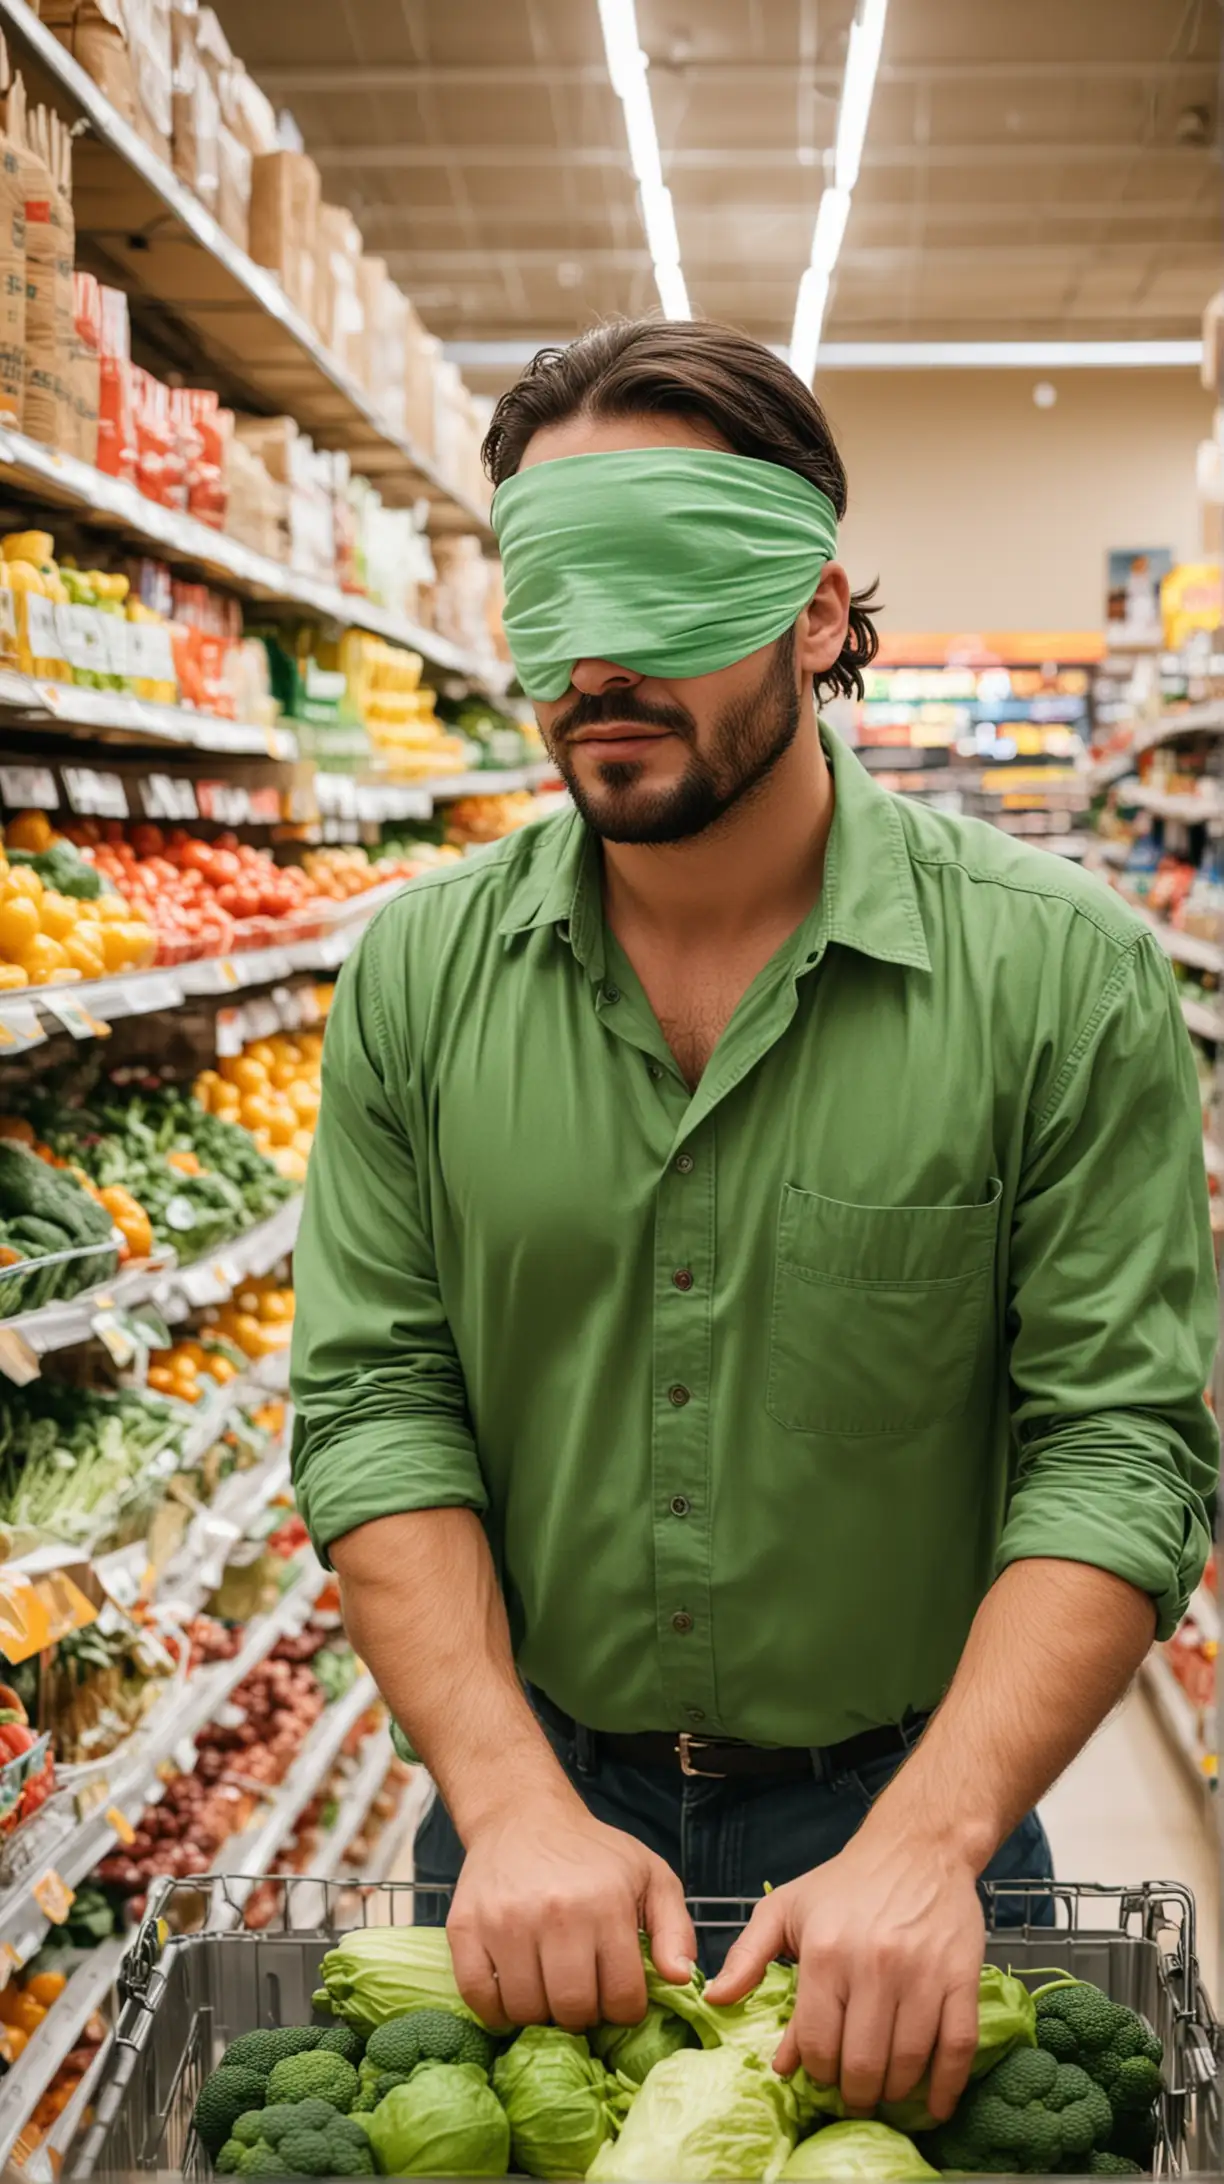 Man in Green Shirt Shopping Blindfolded in Produce Section